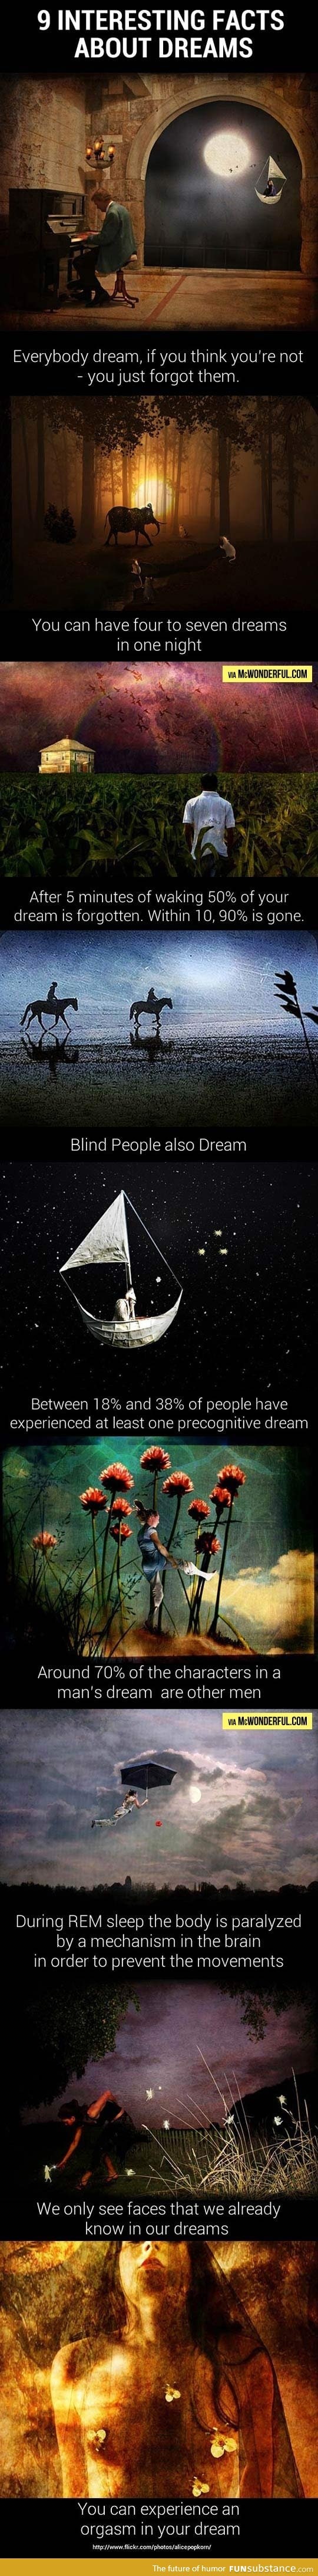 9 interesting facts about dreams